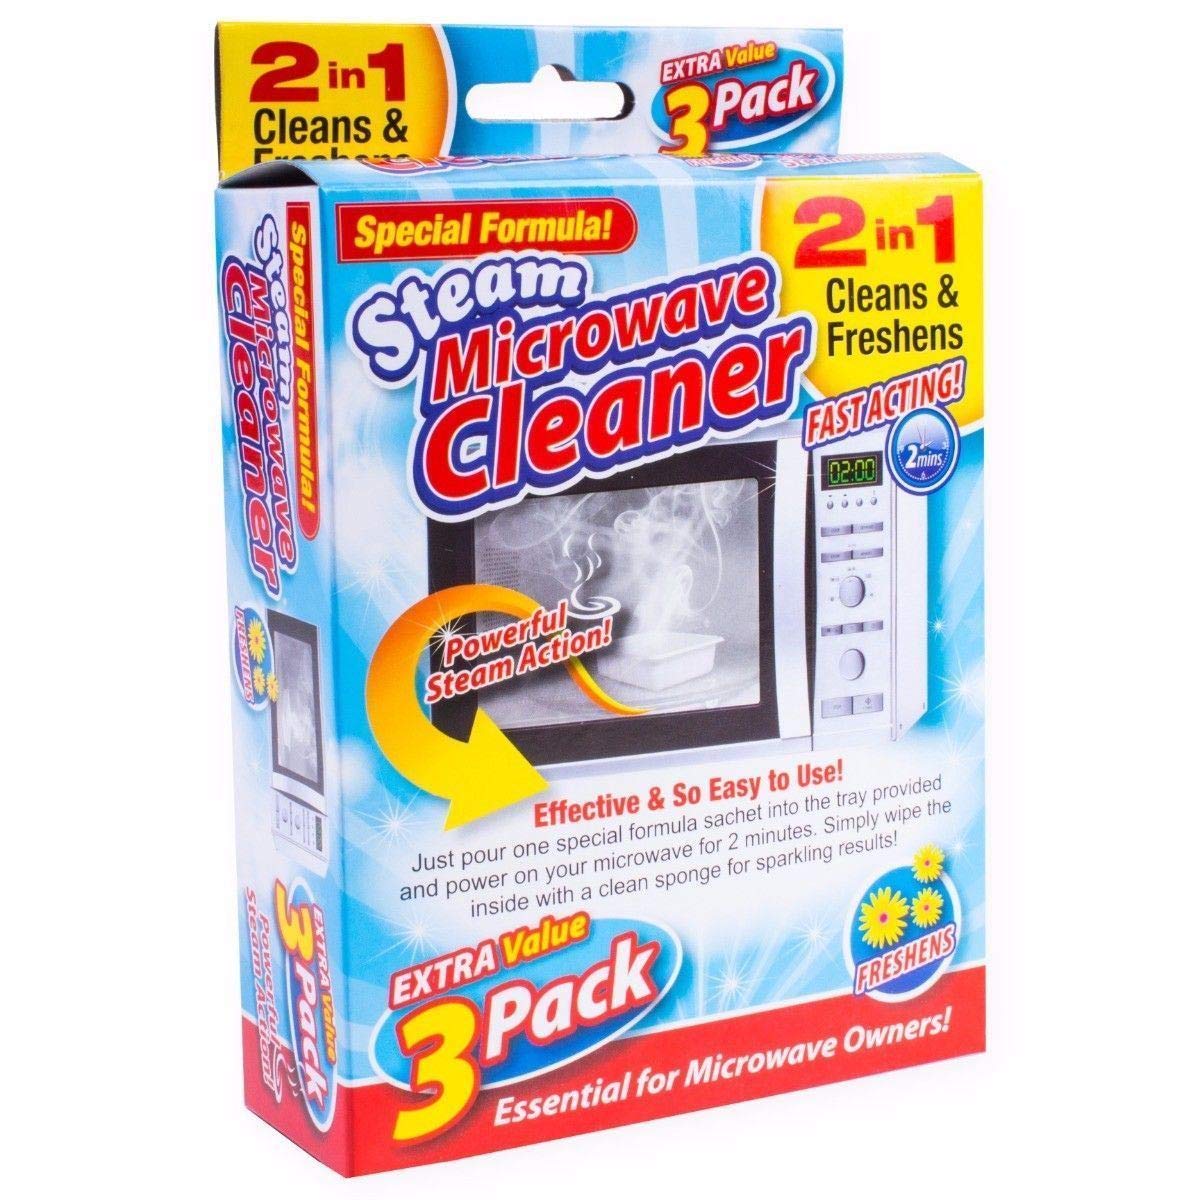 Special Formula STEAM Microwave Cleaner